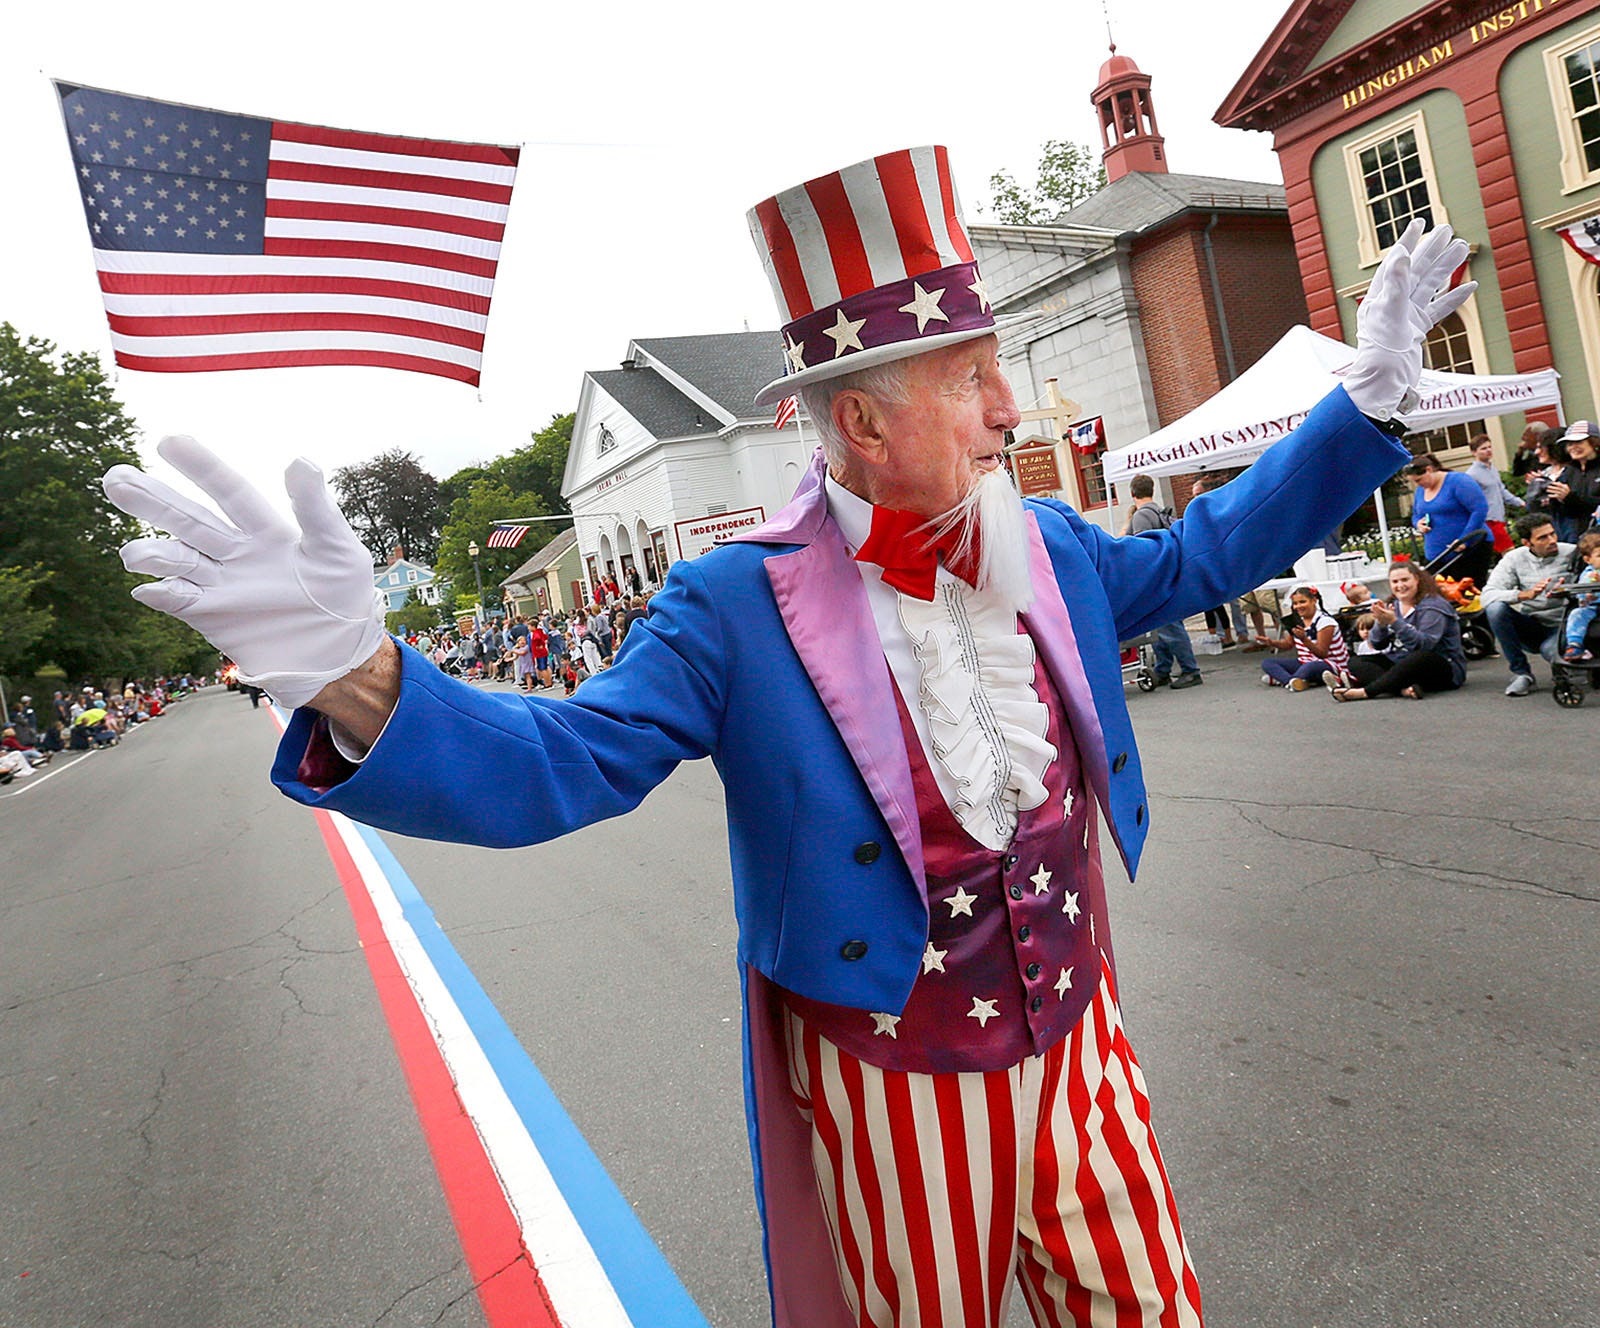 LEAD IMAGEUncle Sam- George Ford-82 leads the parade.The annual July 4th parade in Hingham Square on Sunday July 4, 2021 Greg Derr/The Patriot Ledger070421 Gd Hin Parade13 Jpg